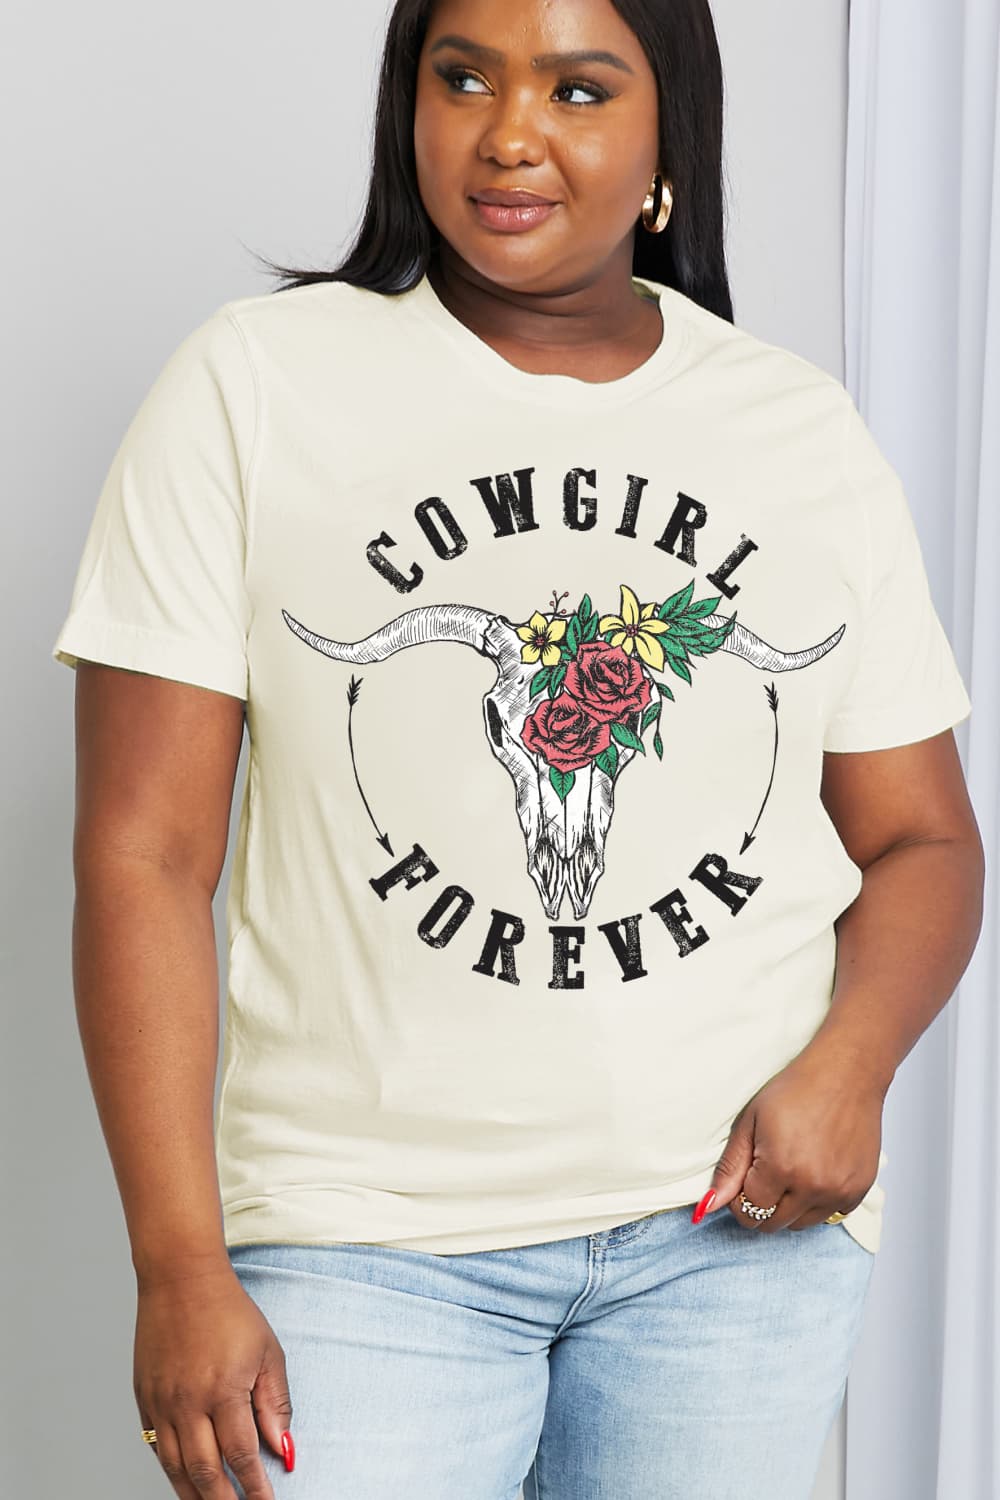 Simply Love Full Size COWGIRL FOREVER Graphic Cotton Tee - AllIn Computer